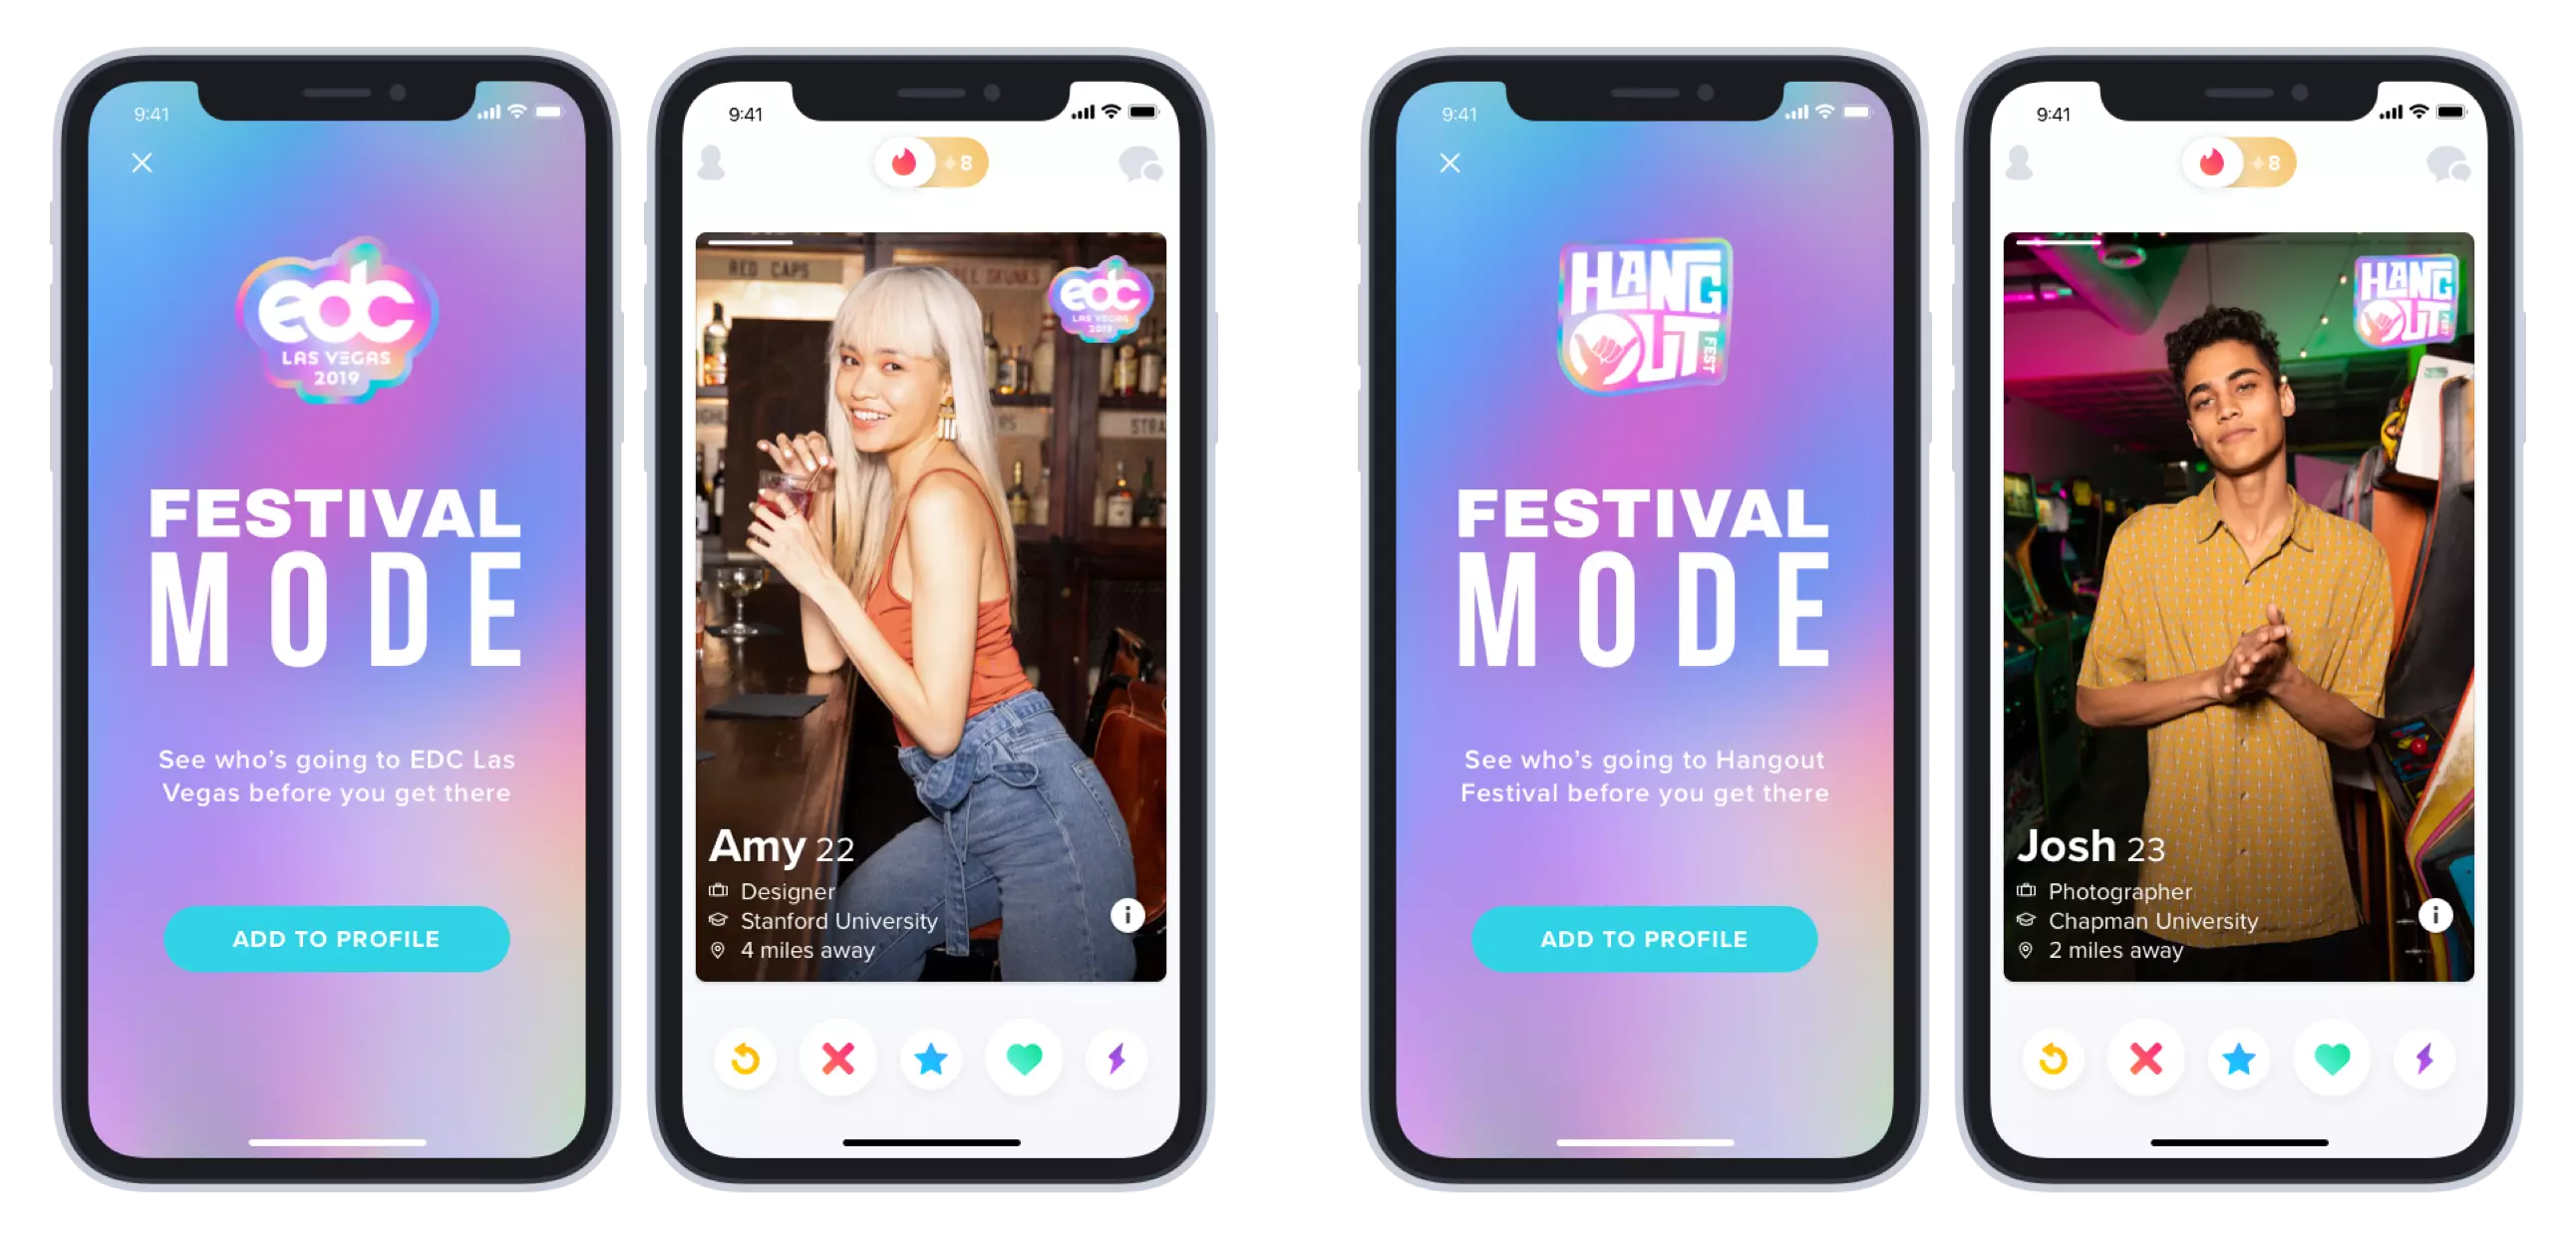 The new feature will allow users to meet up at a selection of festivals in the UK and US.